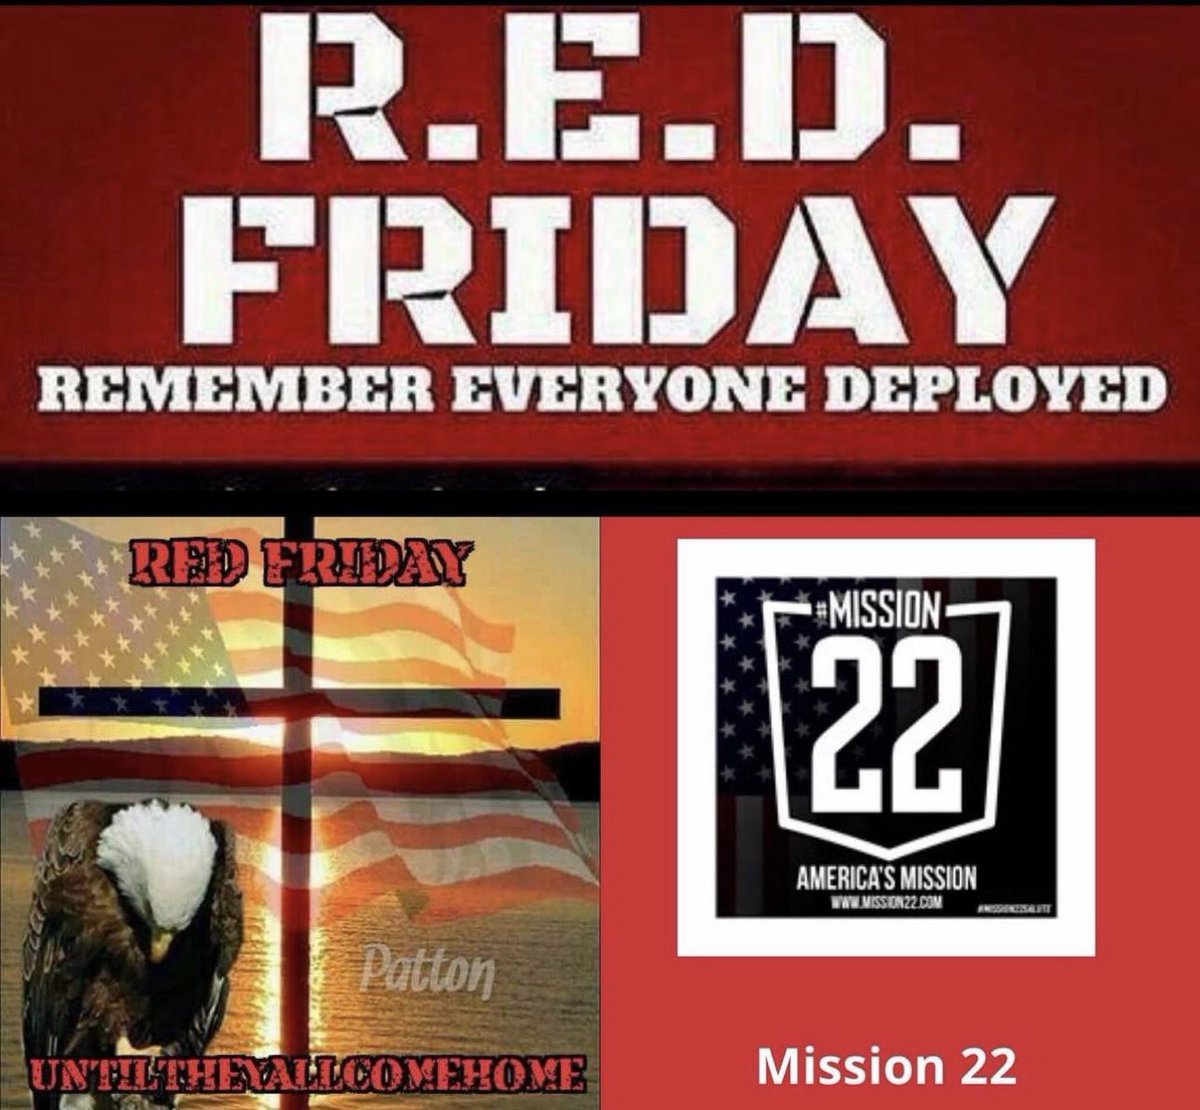 ❤️🇺🇸 God bless our Troops! Until they all come home…❤️🇺🇸
#RedFriday #USA #UntilTheyAllComeHome
#ThankAVet #ThankASoldier #Mission22